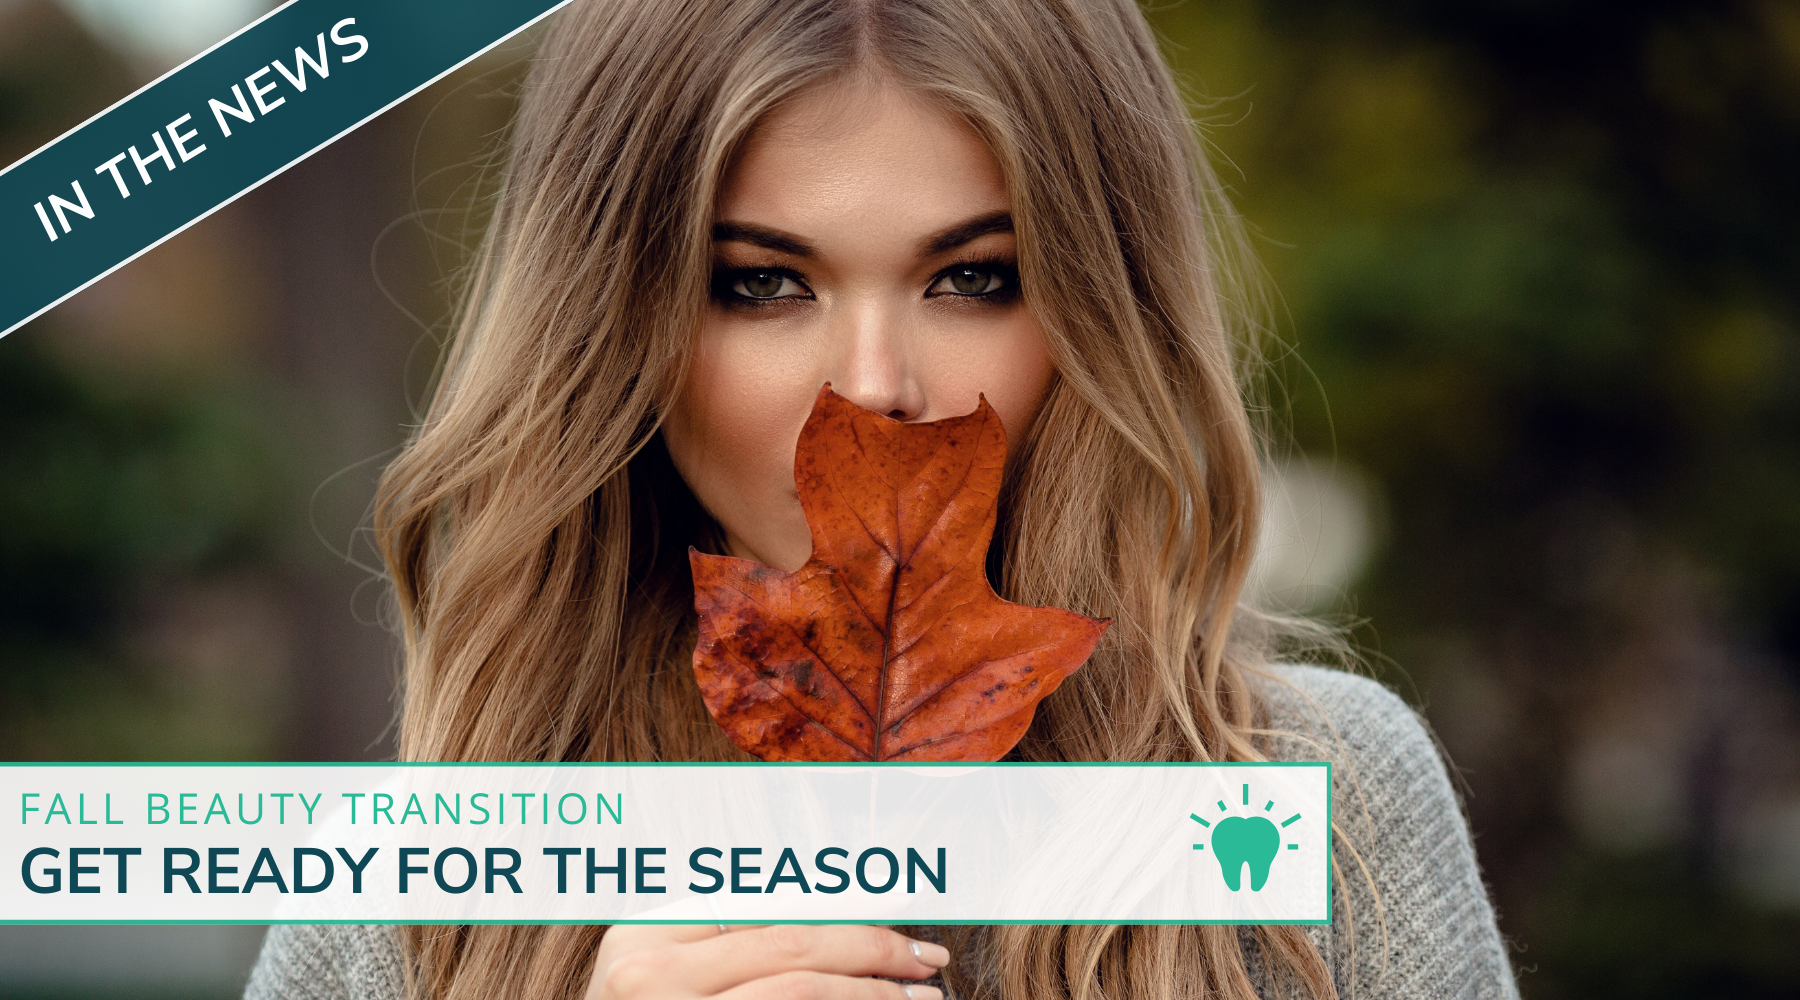 Fall Beauty Transition - Get Ready For The Season With This Tips!